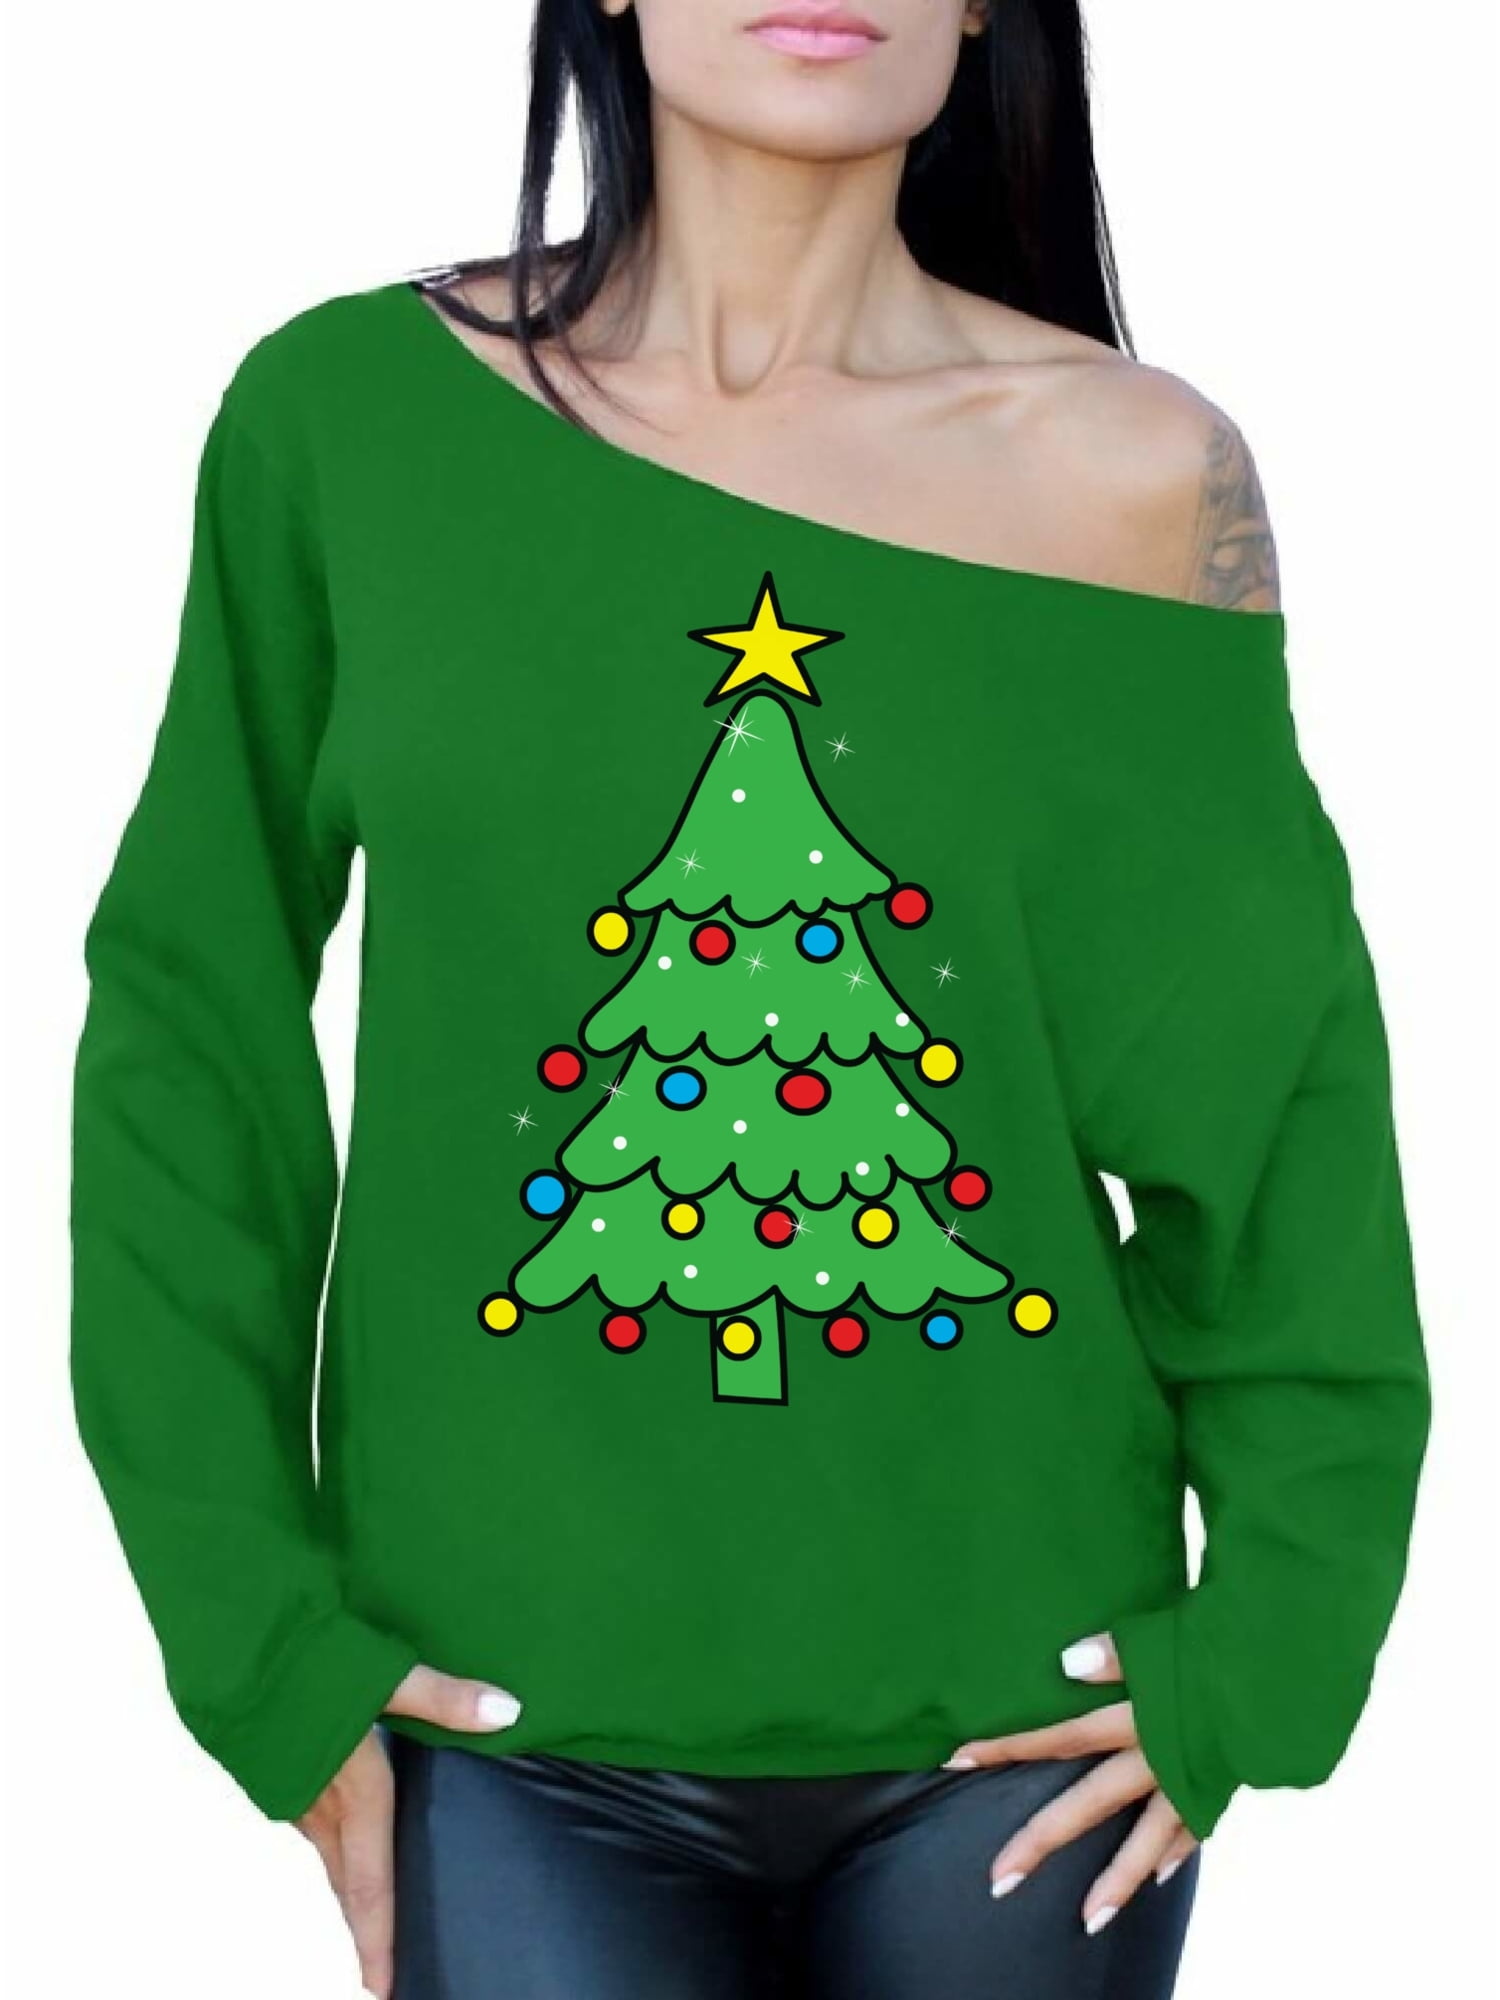 Kanzd Christmas Sweatshirts for Women Fashion Long Sleeve Crewneck Casual Cute Santa Graphic Loose Pullover Sweaters Blouse 